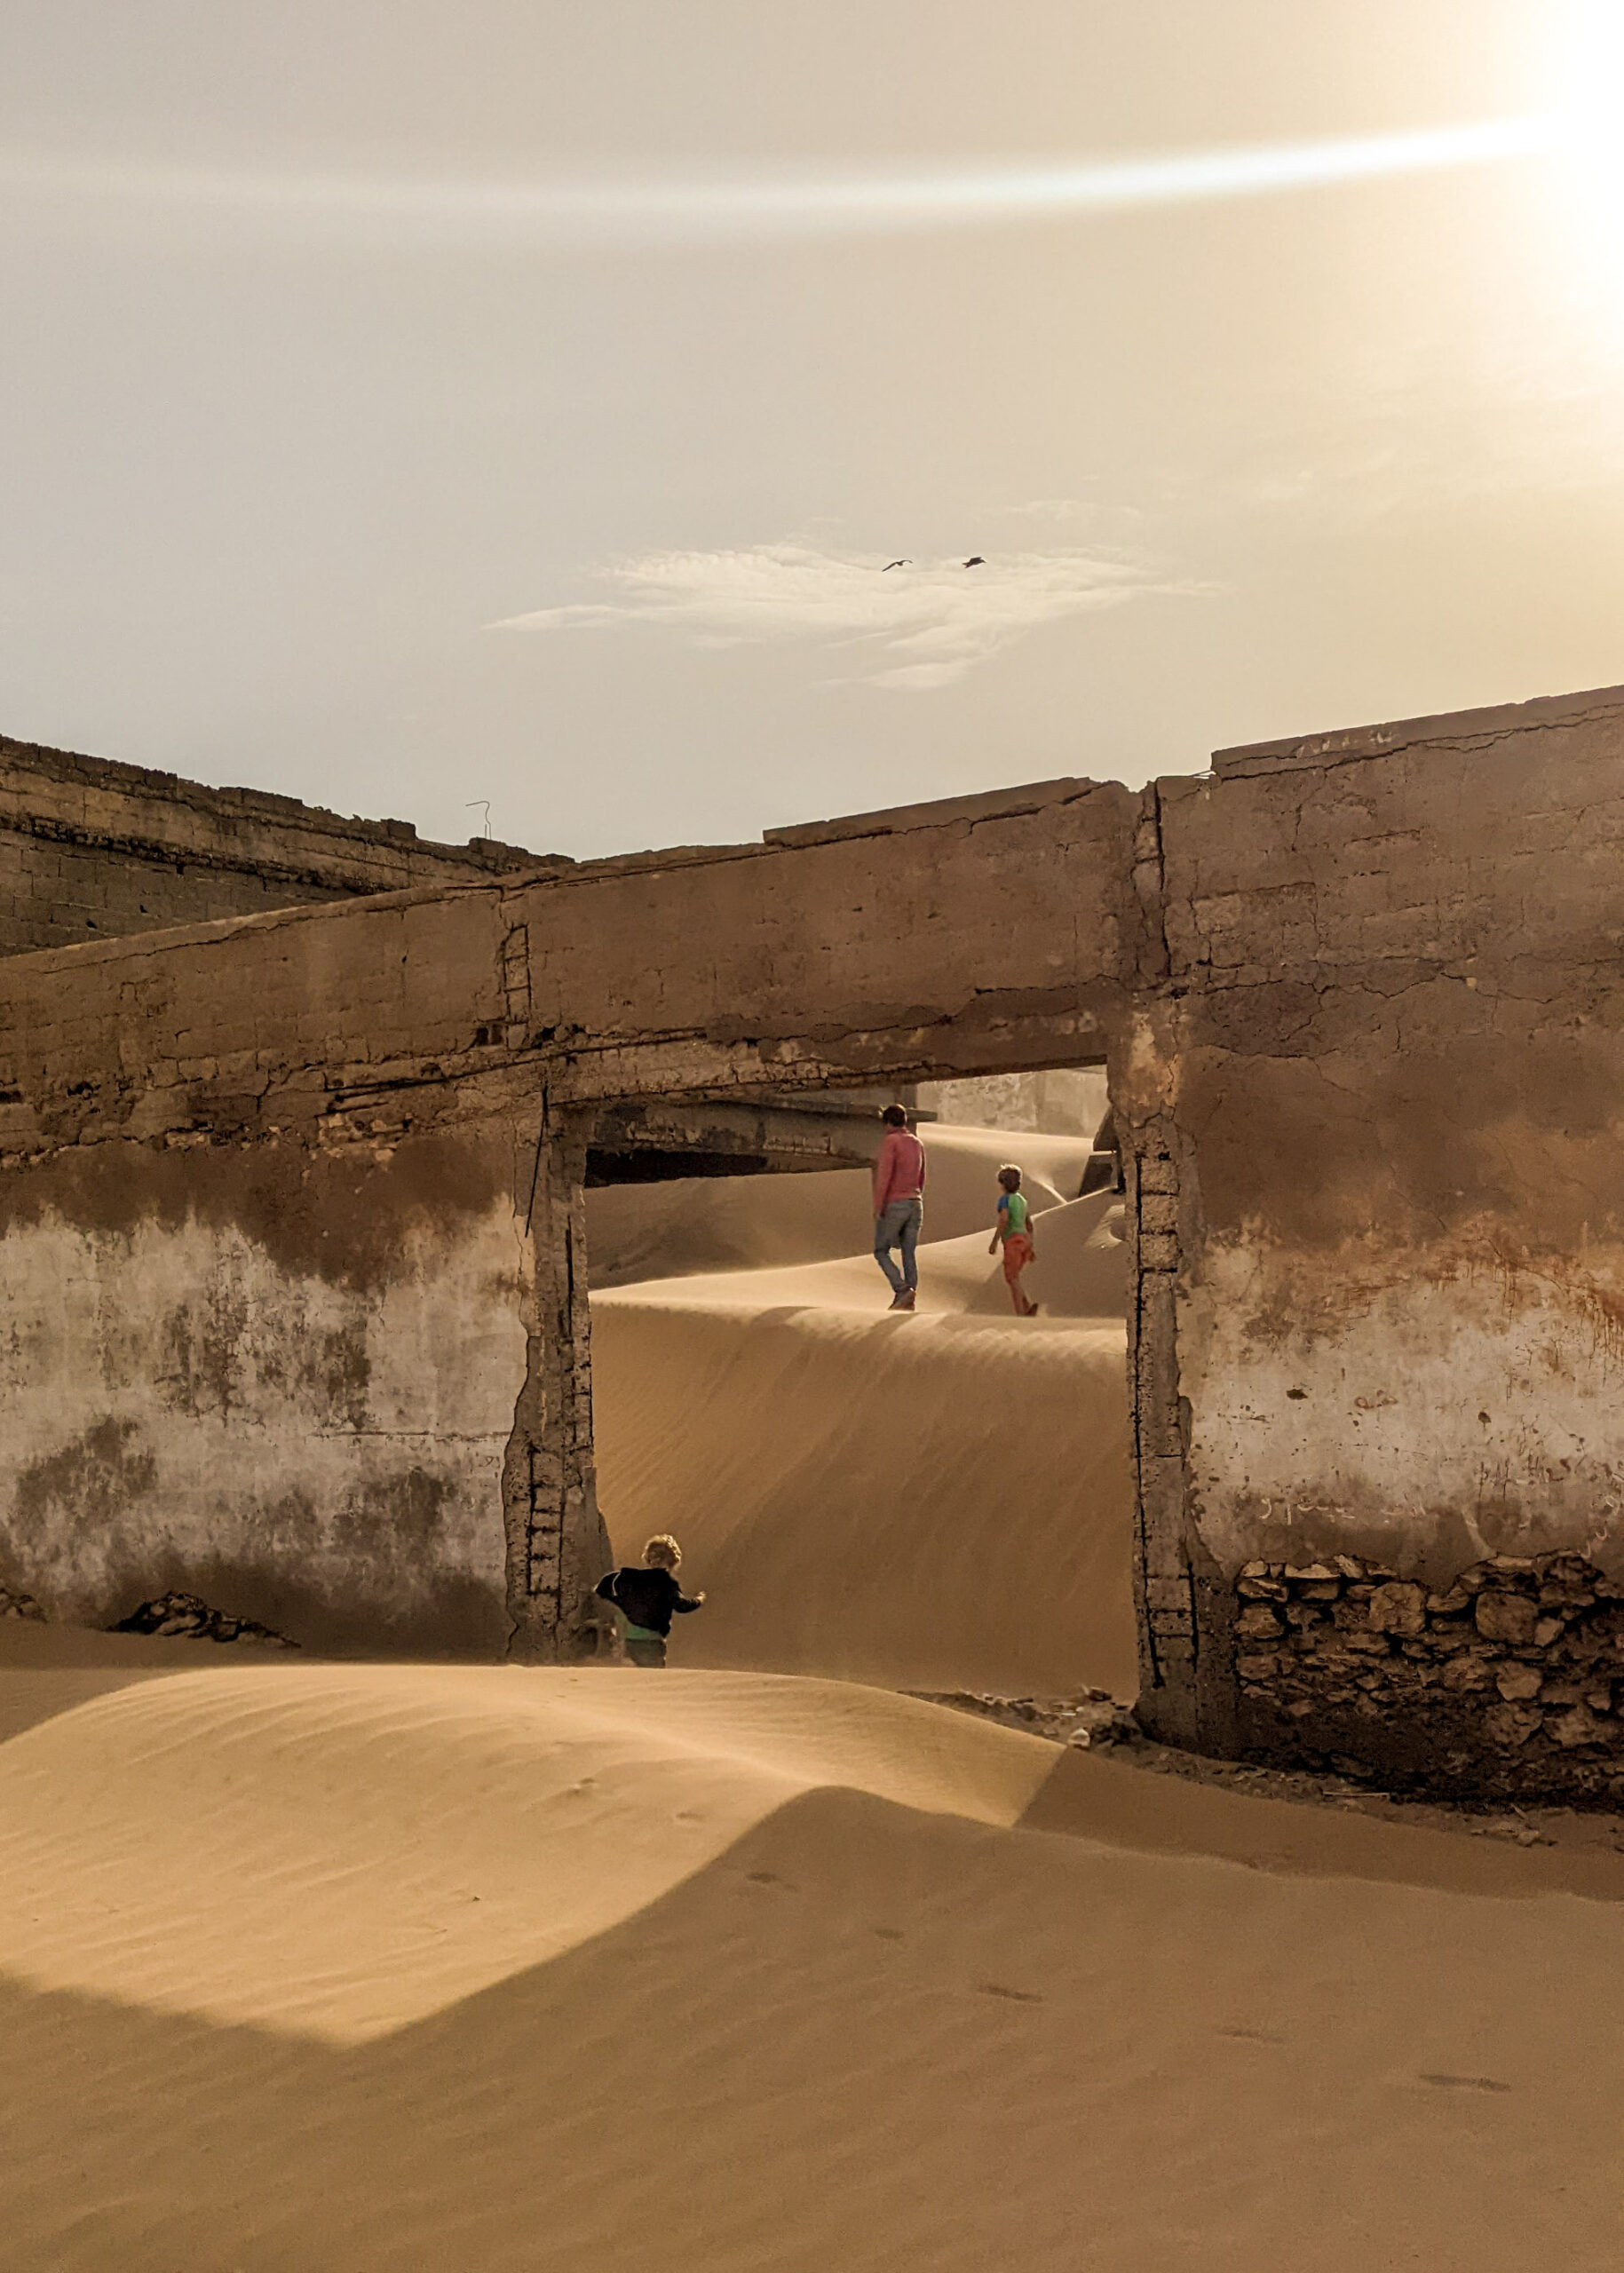 abandoned buildings lost to the sand at the northern edge of Essaouira